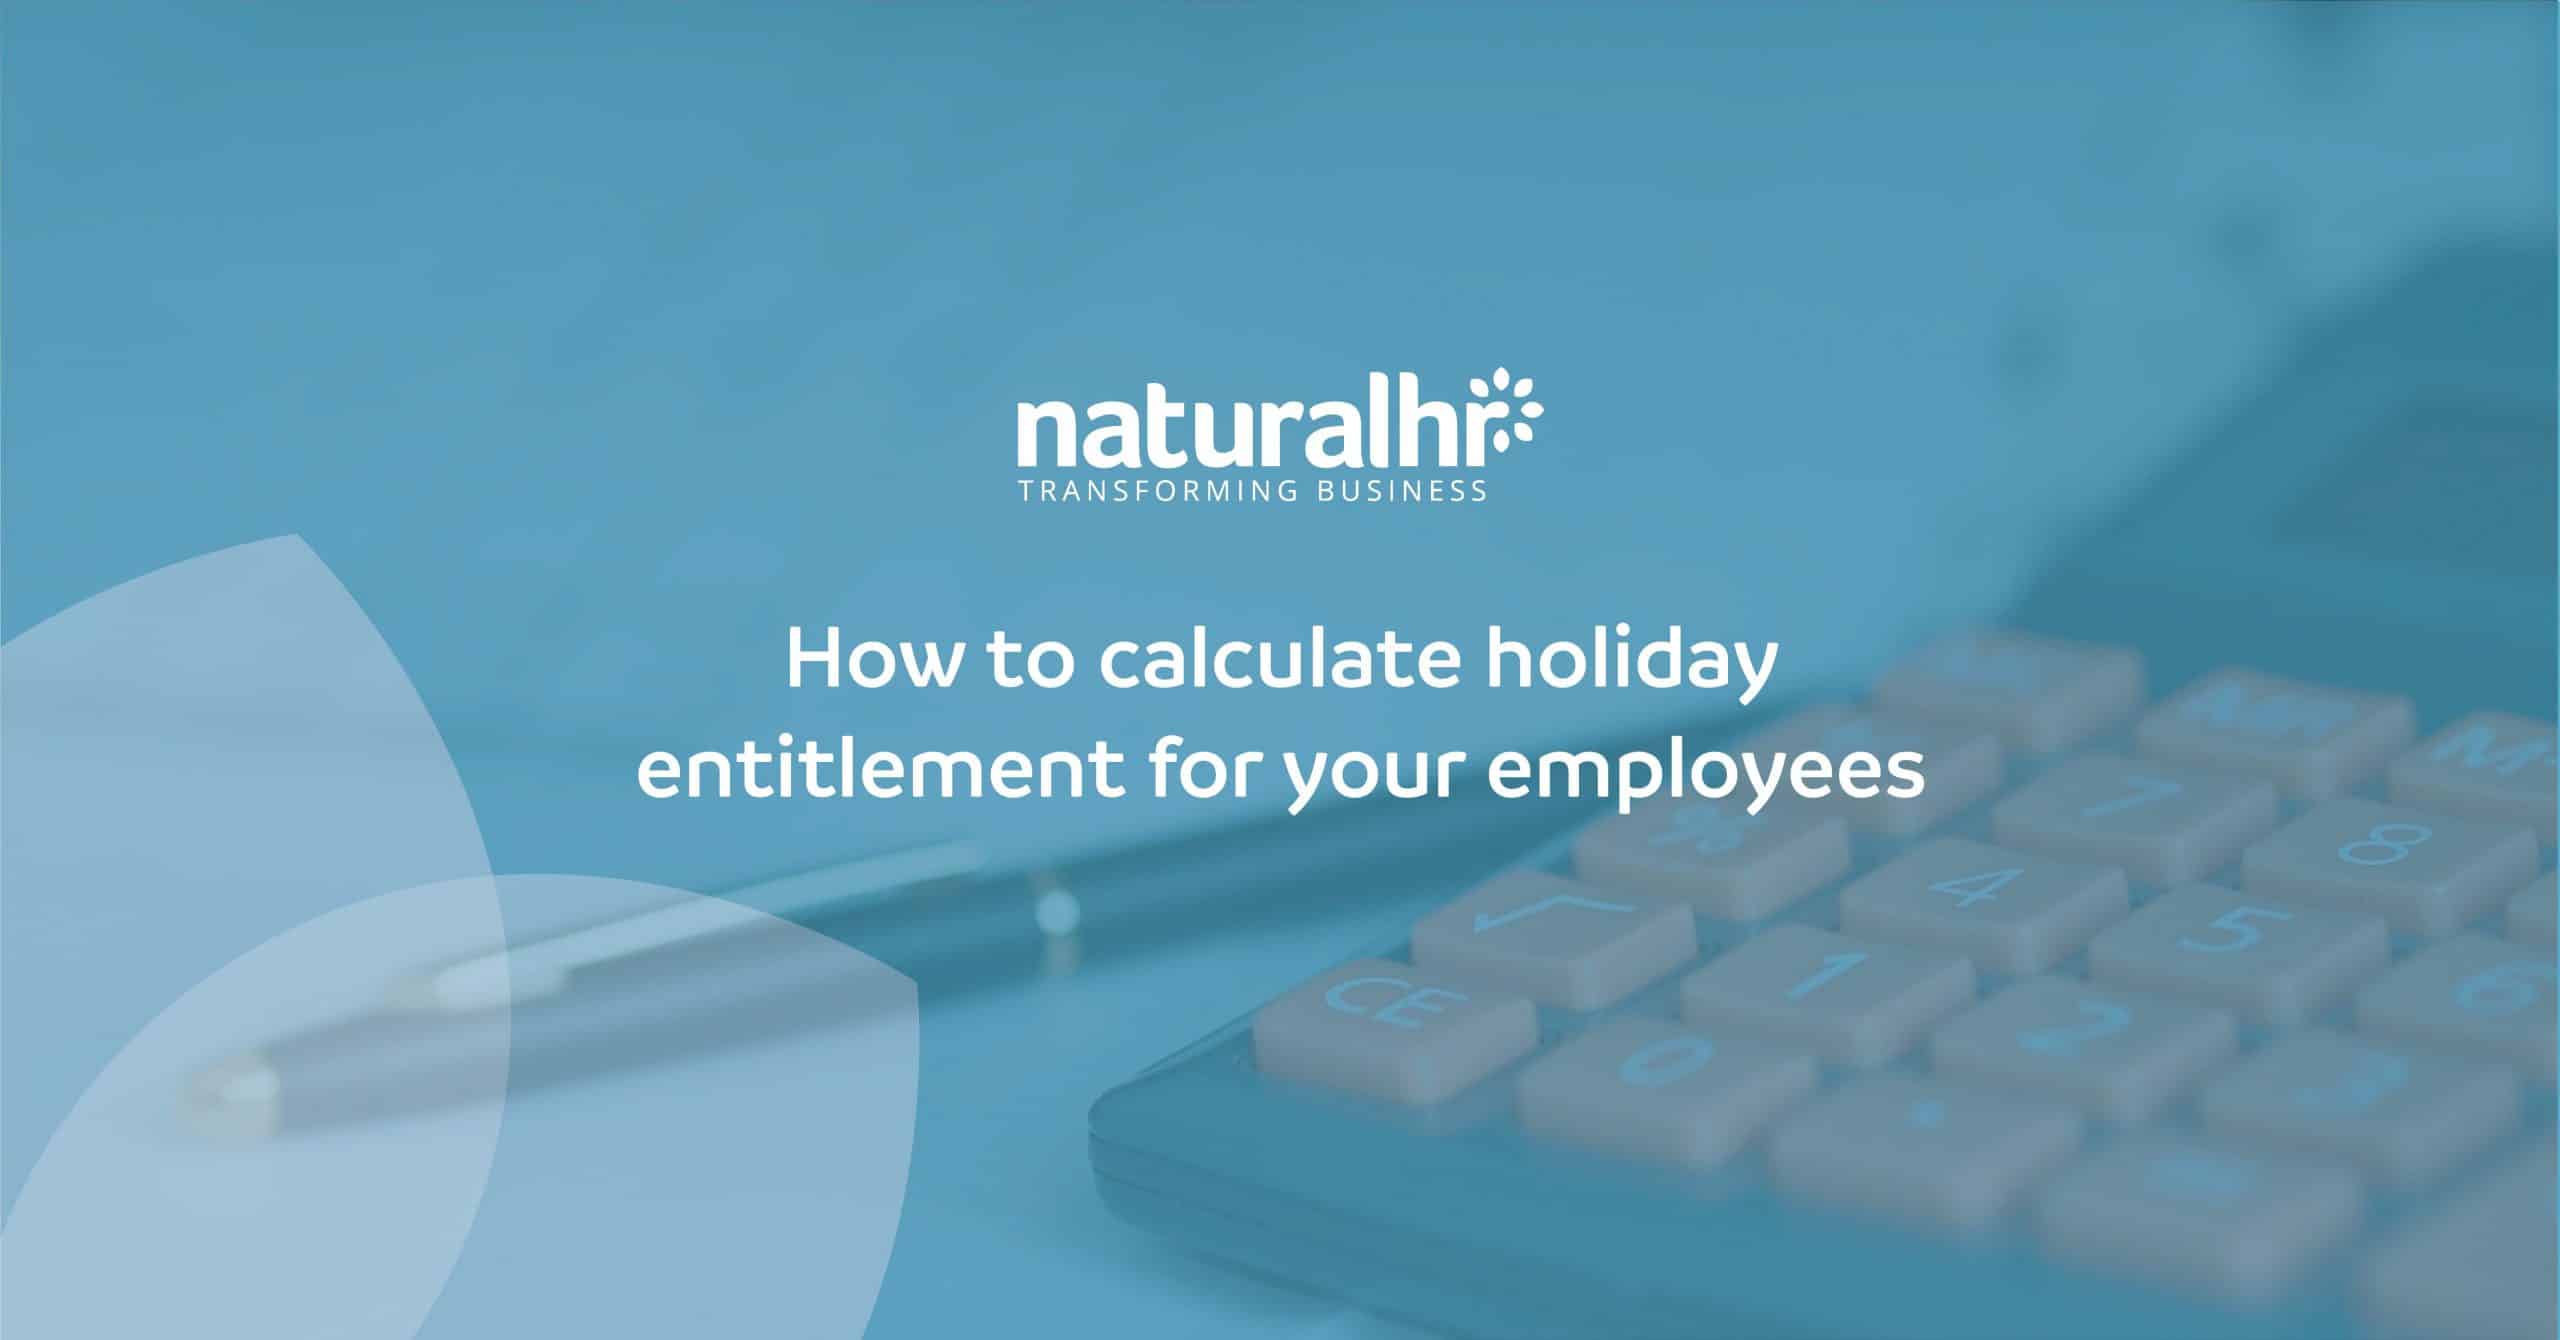 How to calculate holiday entitlement for your employees